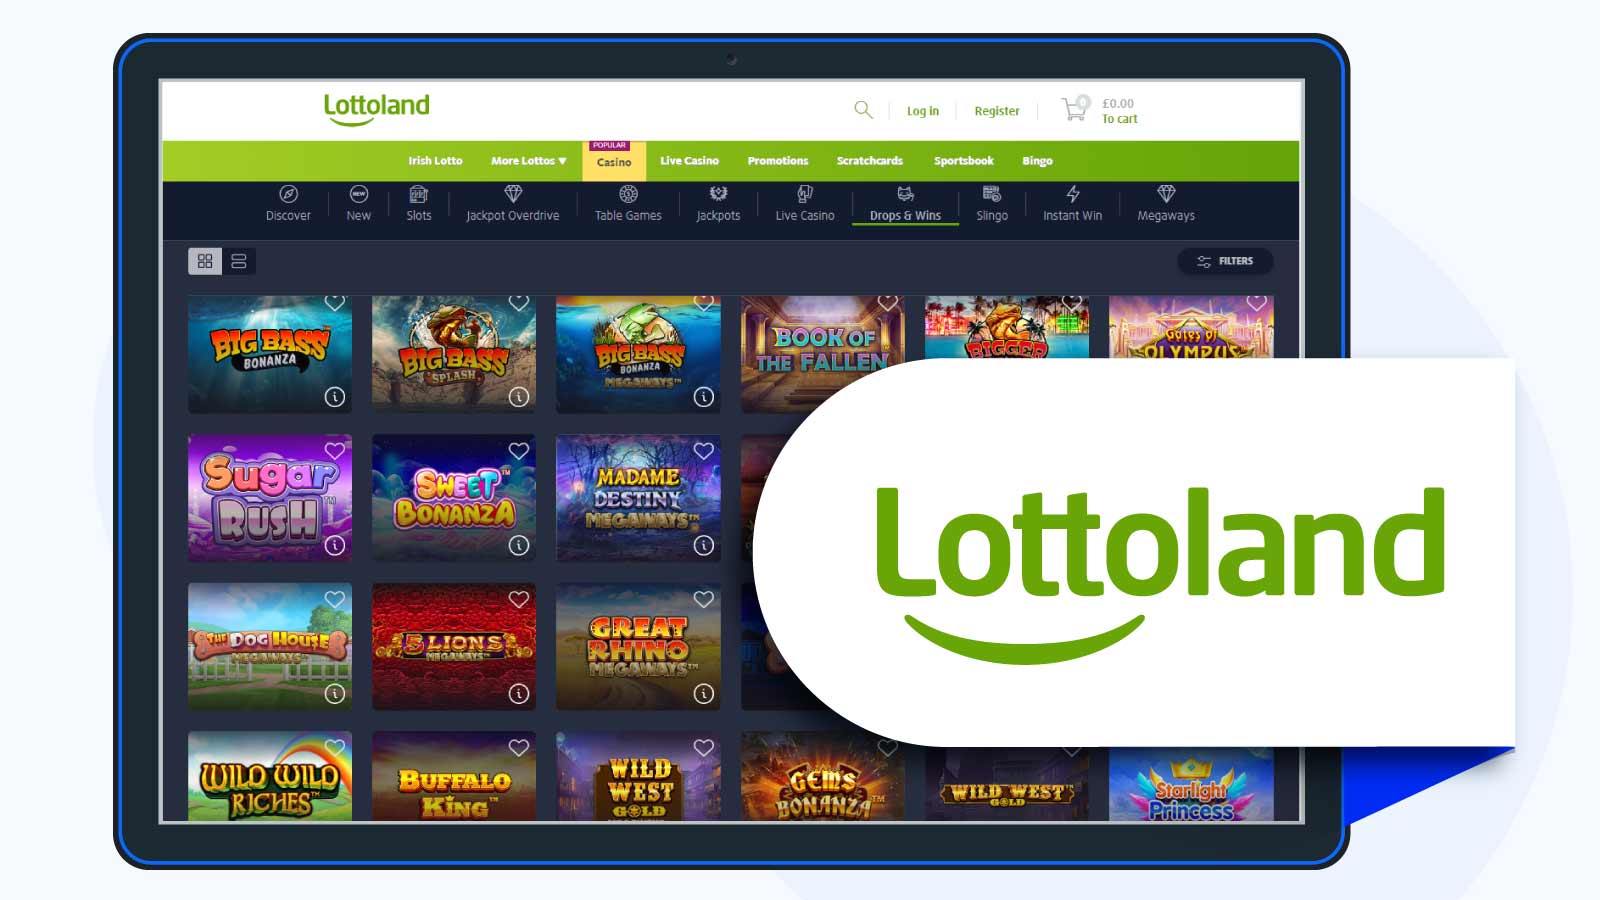 Lottoland Casino – Editor’s Choice For Slots Selection